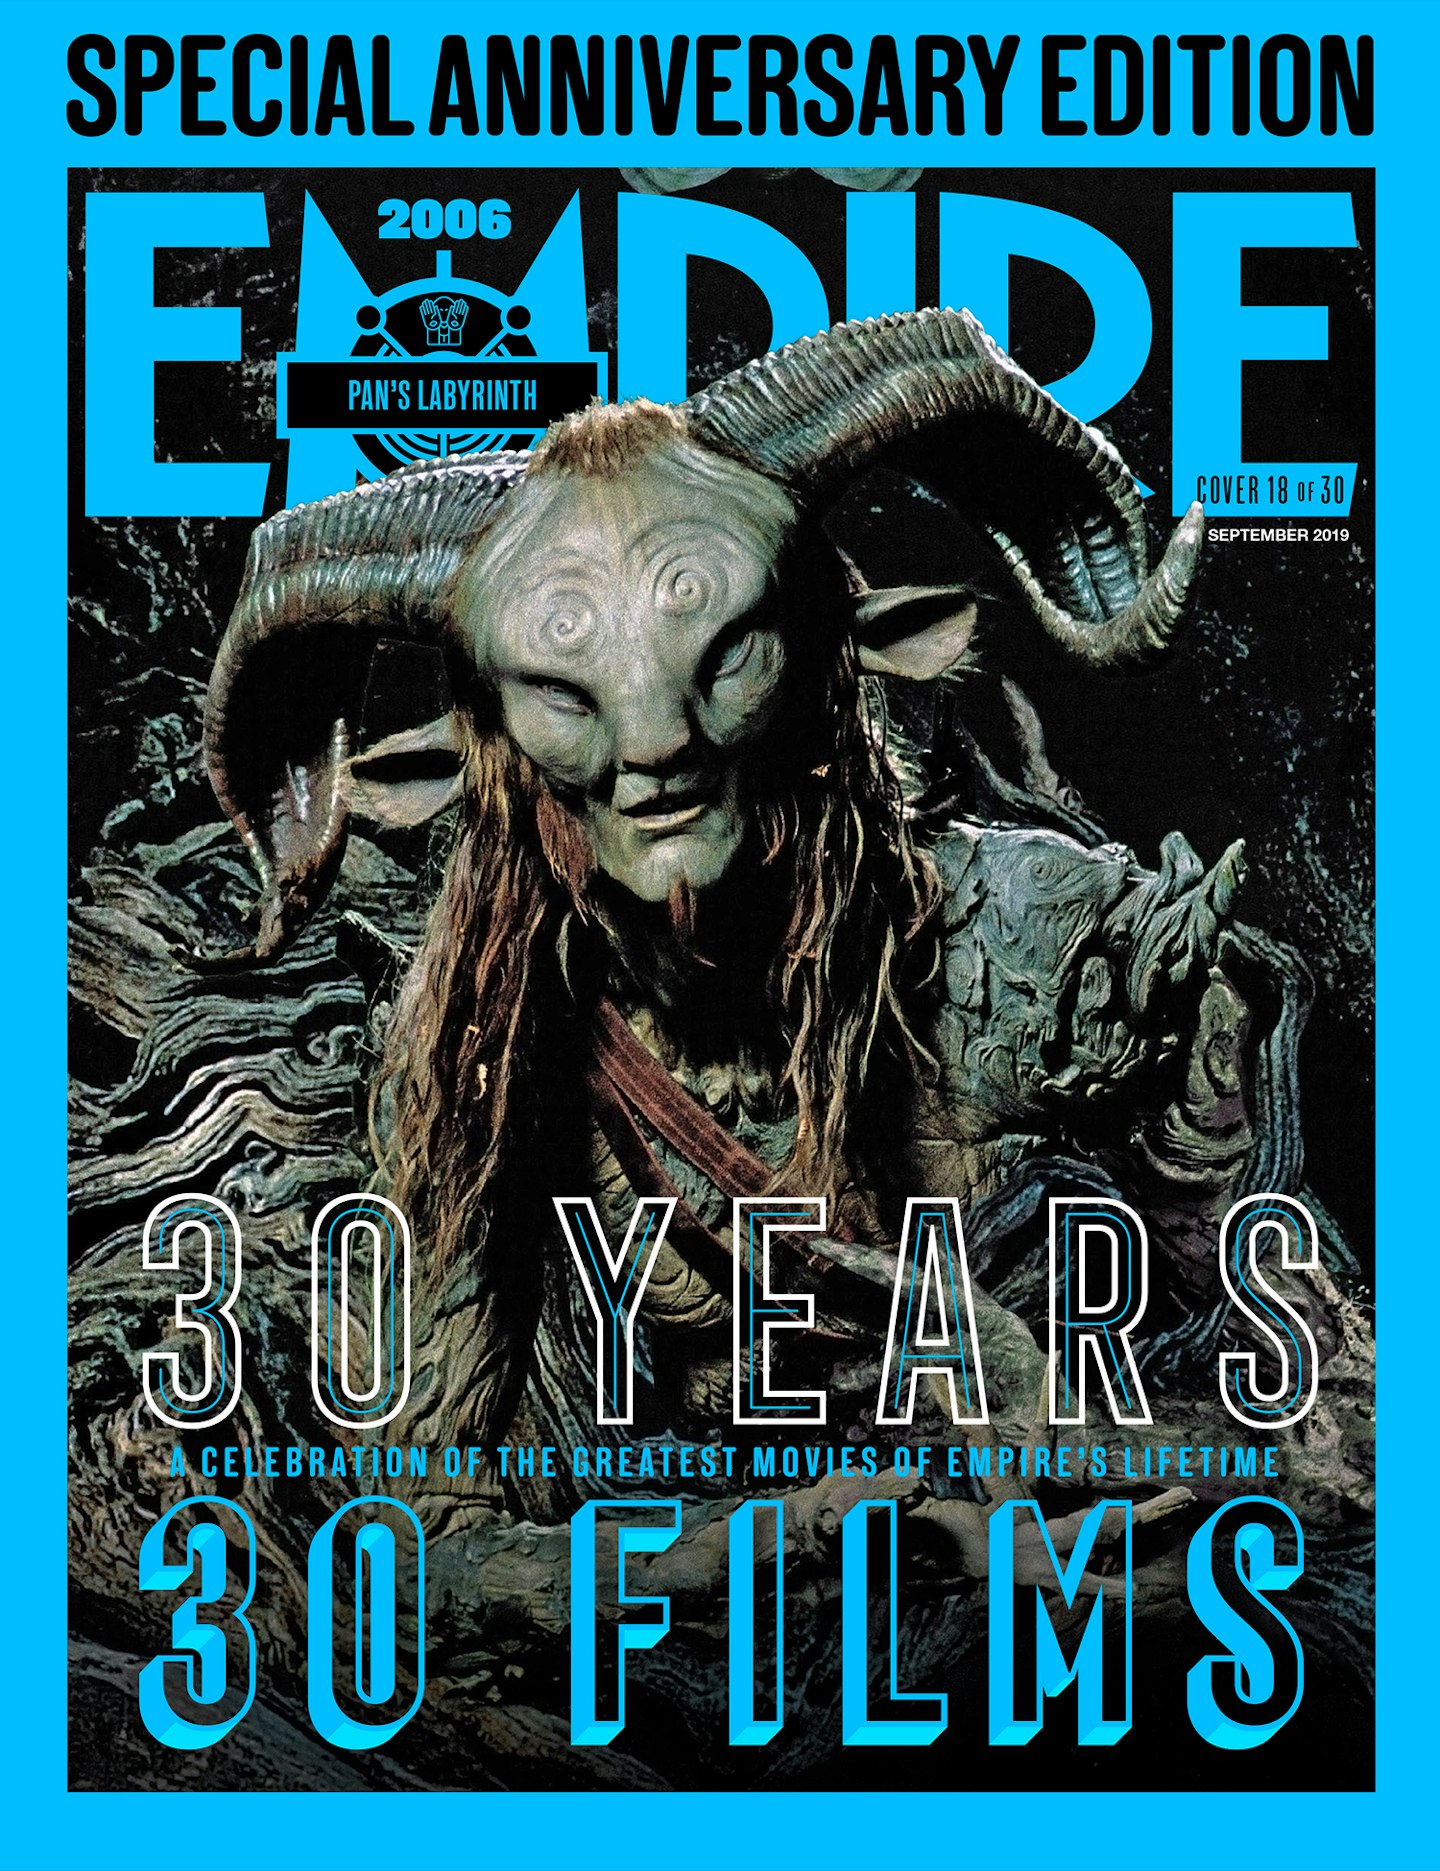 Empire's 30th Anniversary Edition Covers – Pan's Labyrinth